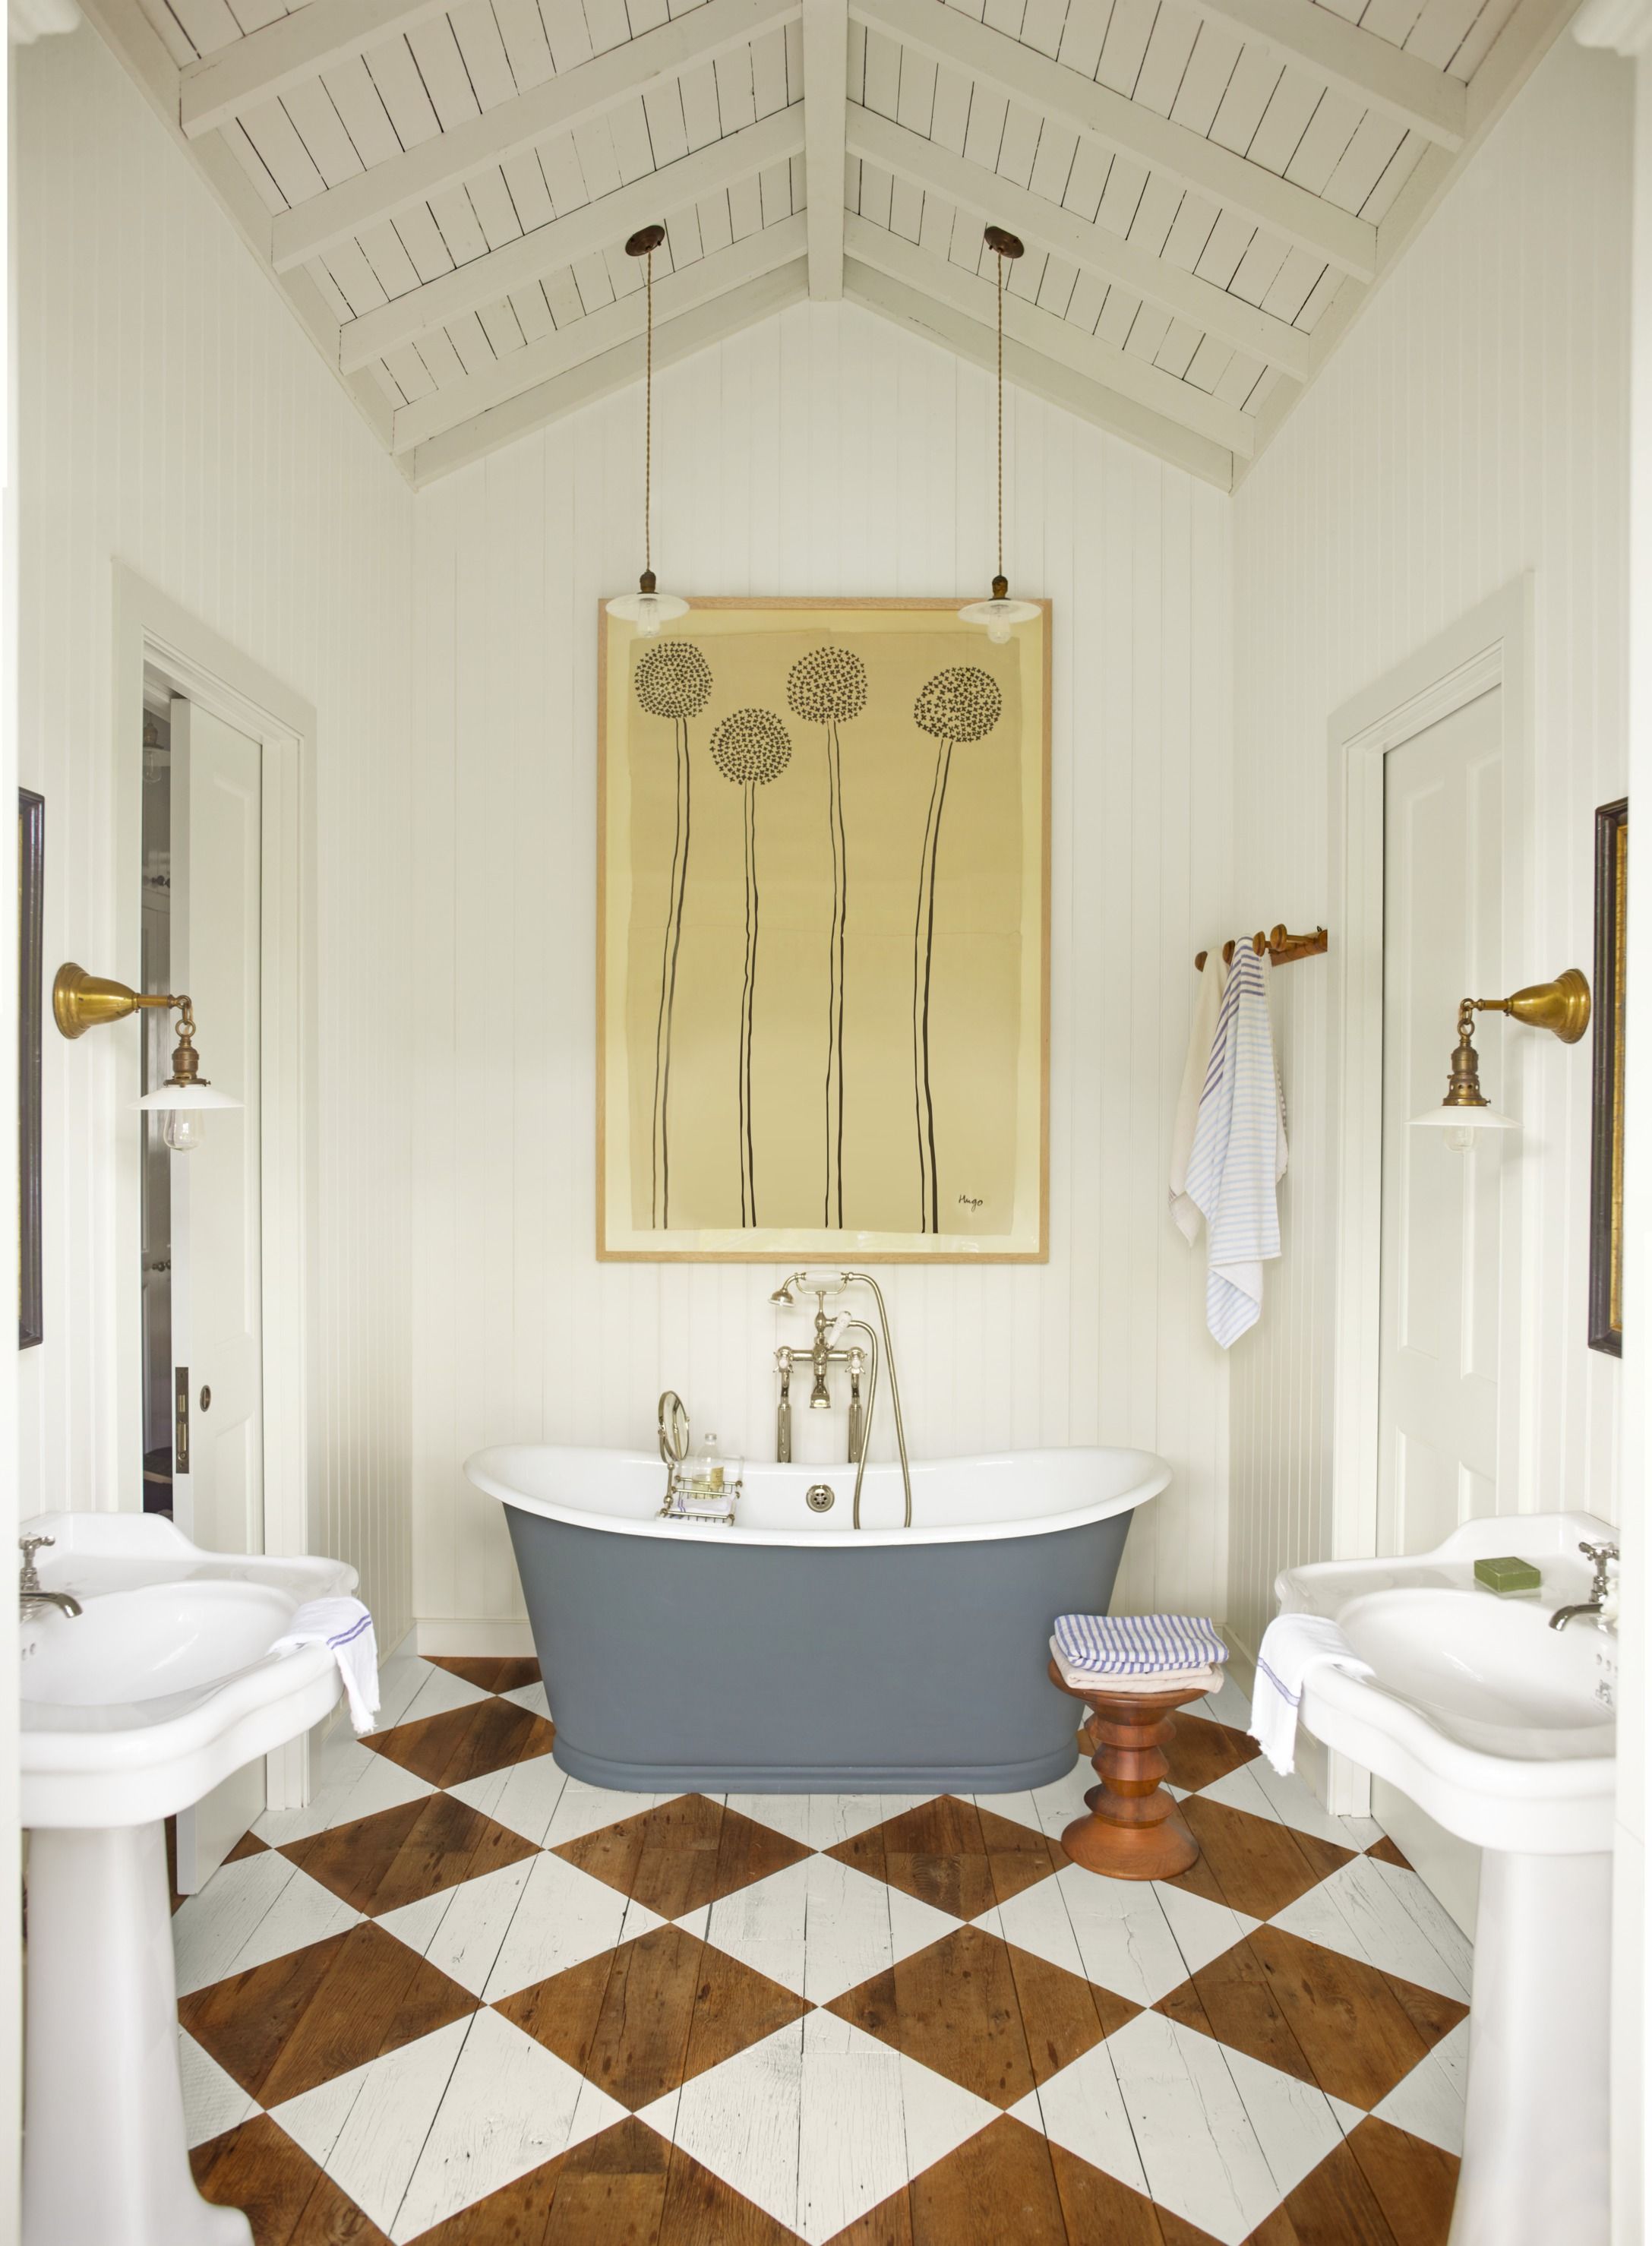 20 Country Bathroom Ideas To Inspire Your Decorating Choices